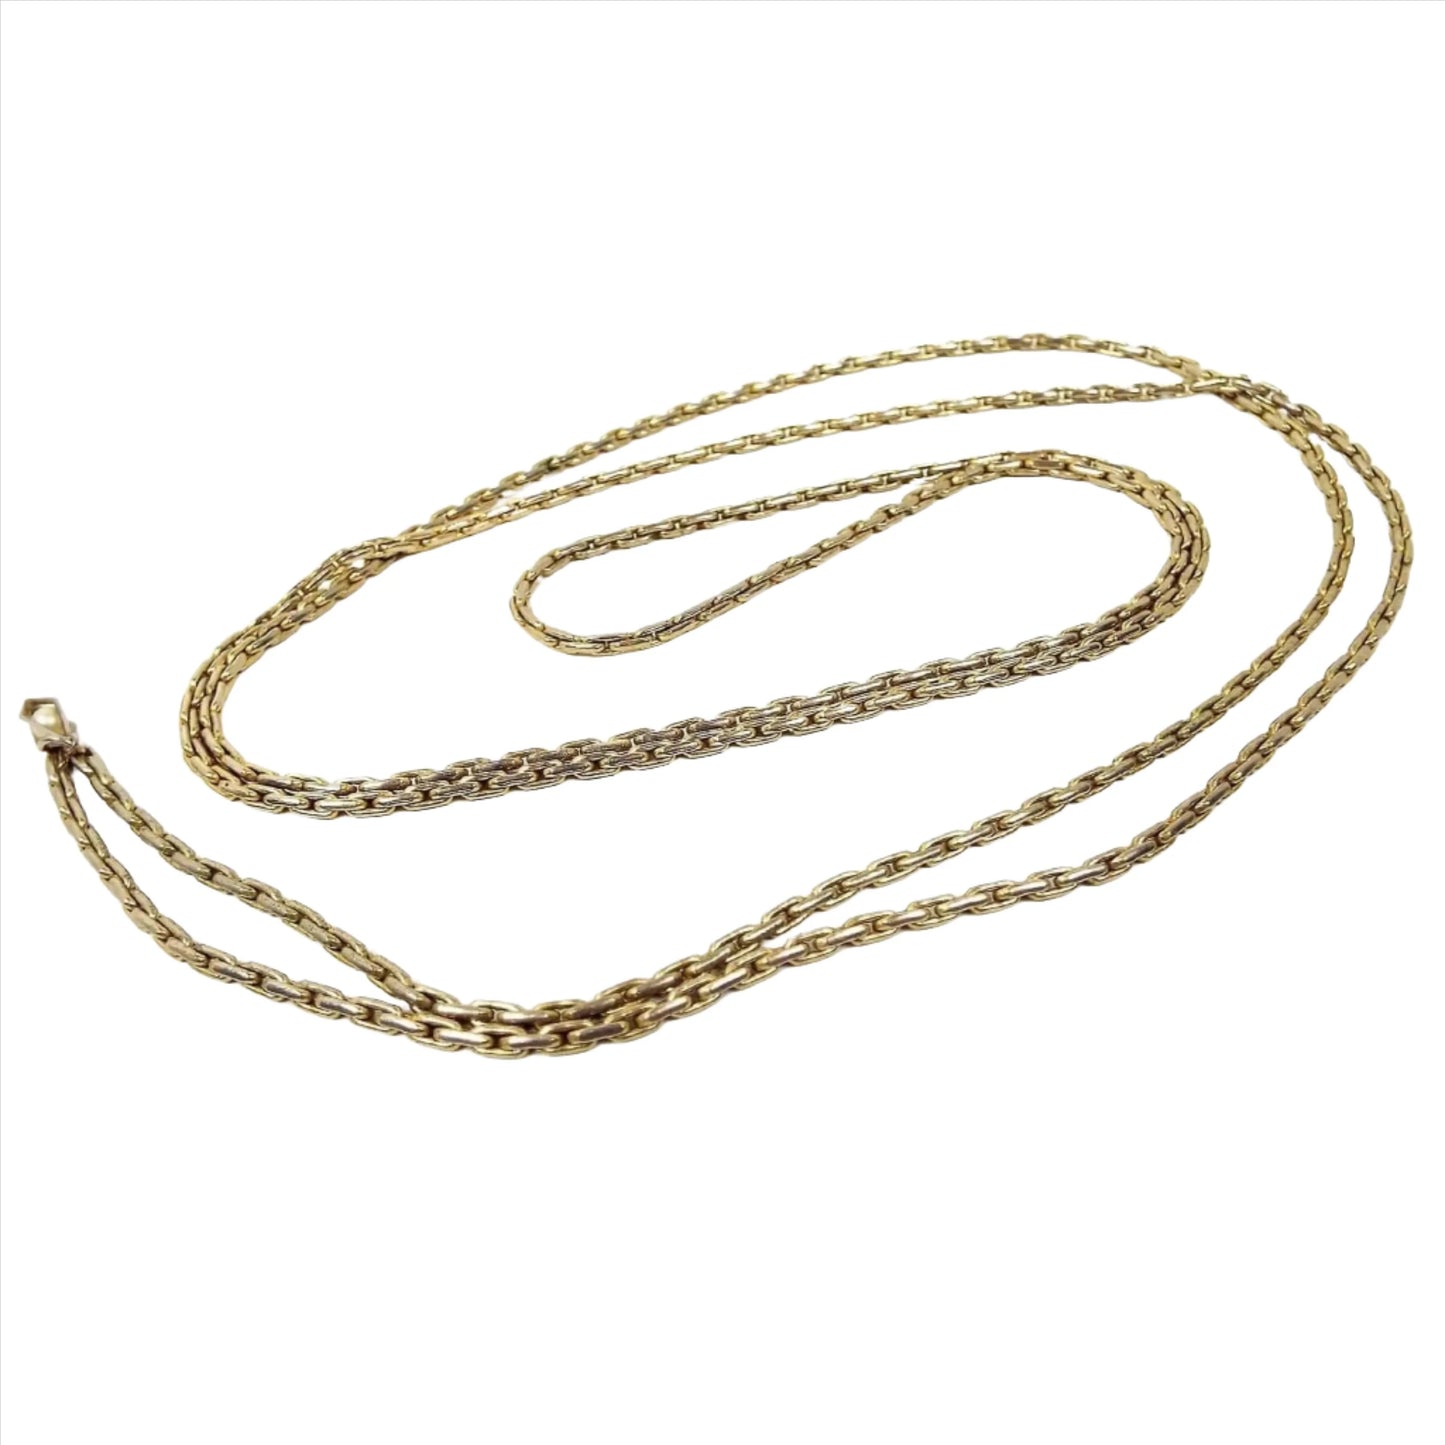 Top view of the retro vintage square link chain necklace. The metal is gold tone in color and a fancy rounded edge square link design. At the end there is a small faceted bottom teardrop charm with a faux pearl in it. There is no clasp as it's long and goes over your head.